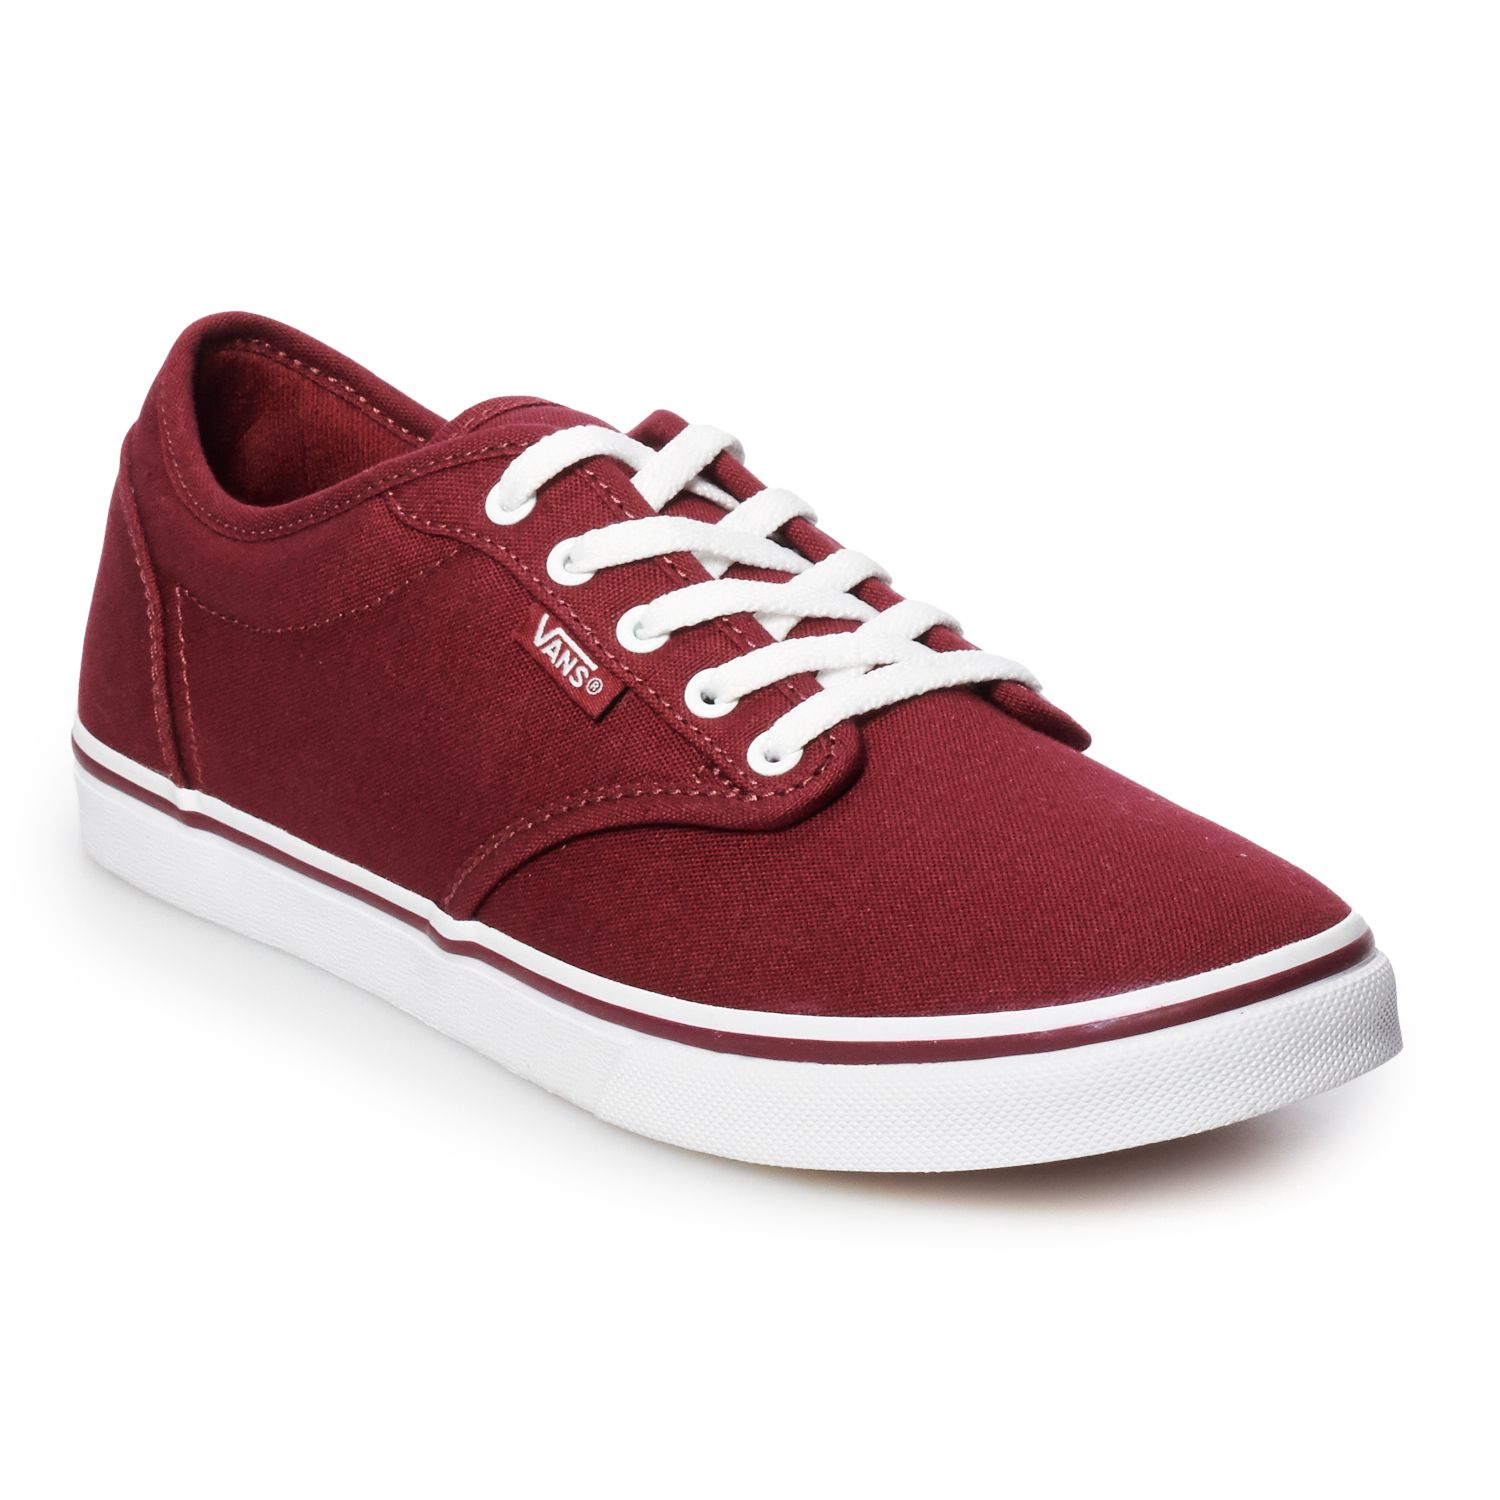 atwood vans womens